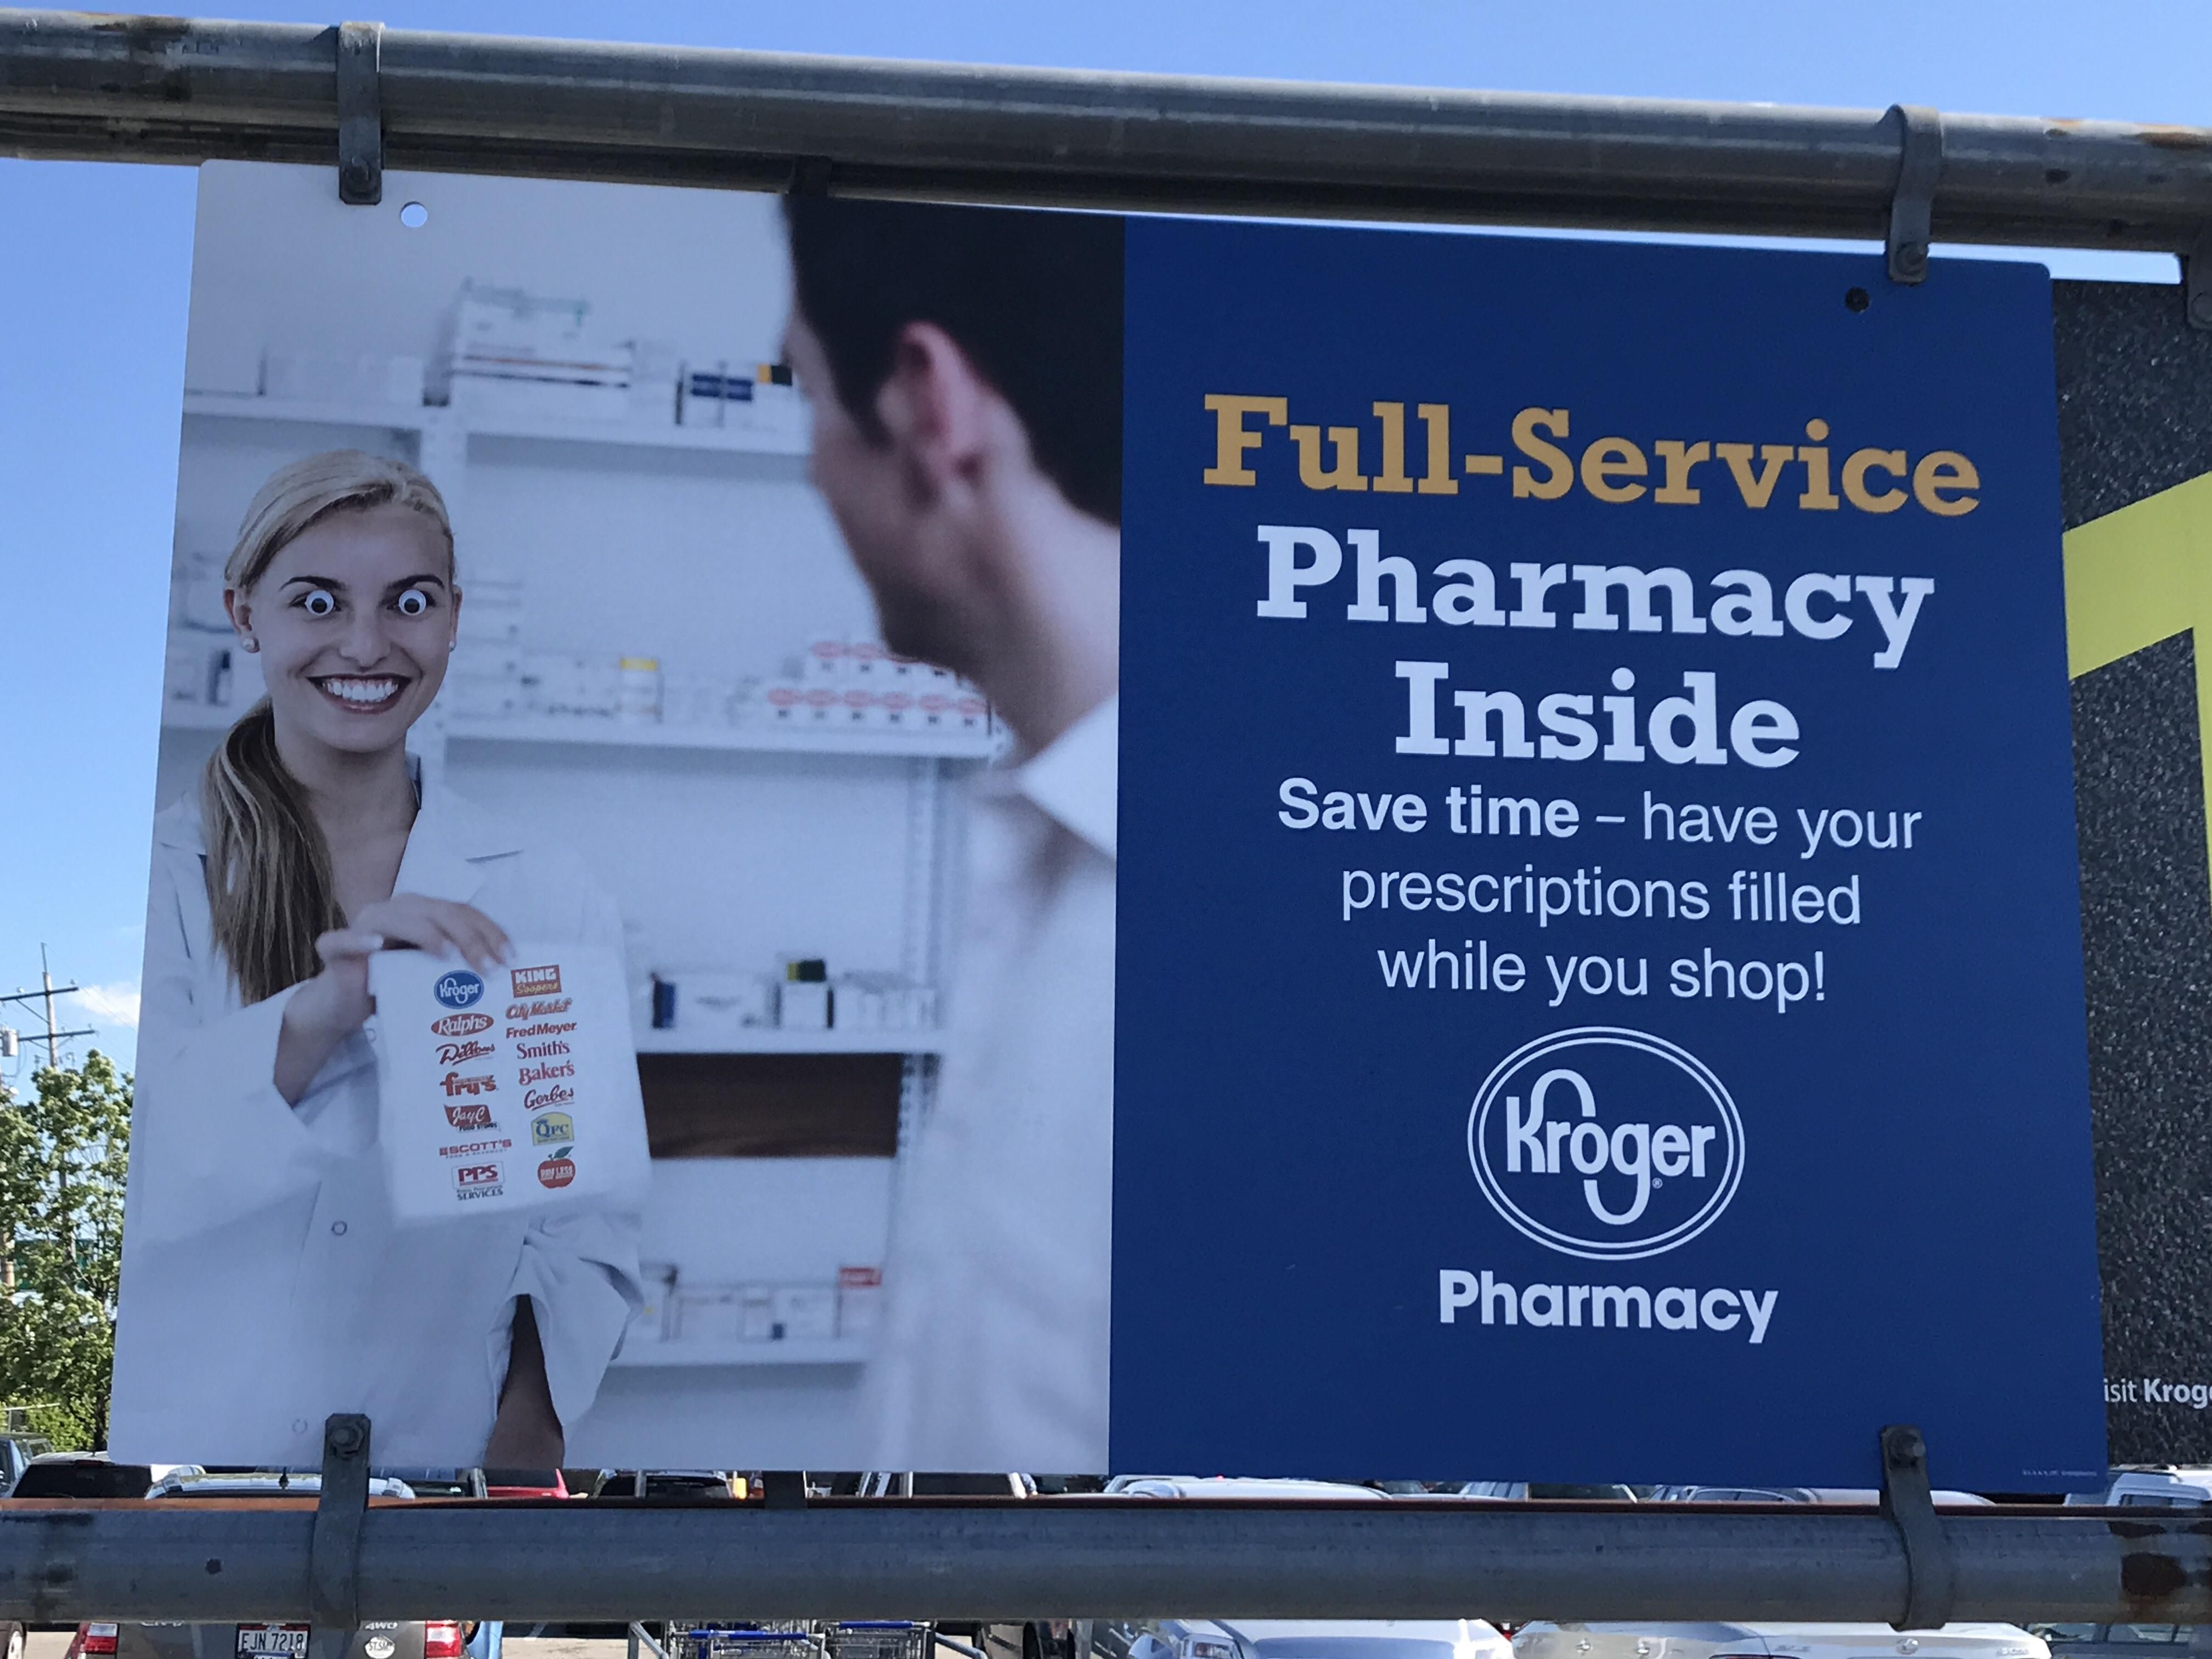 Not buying anything from this pharmacy.